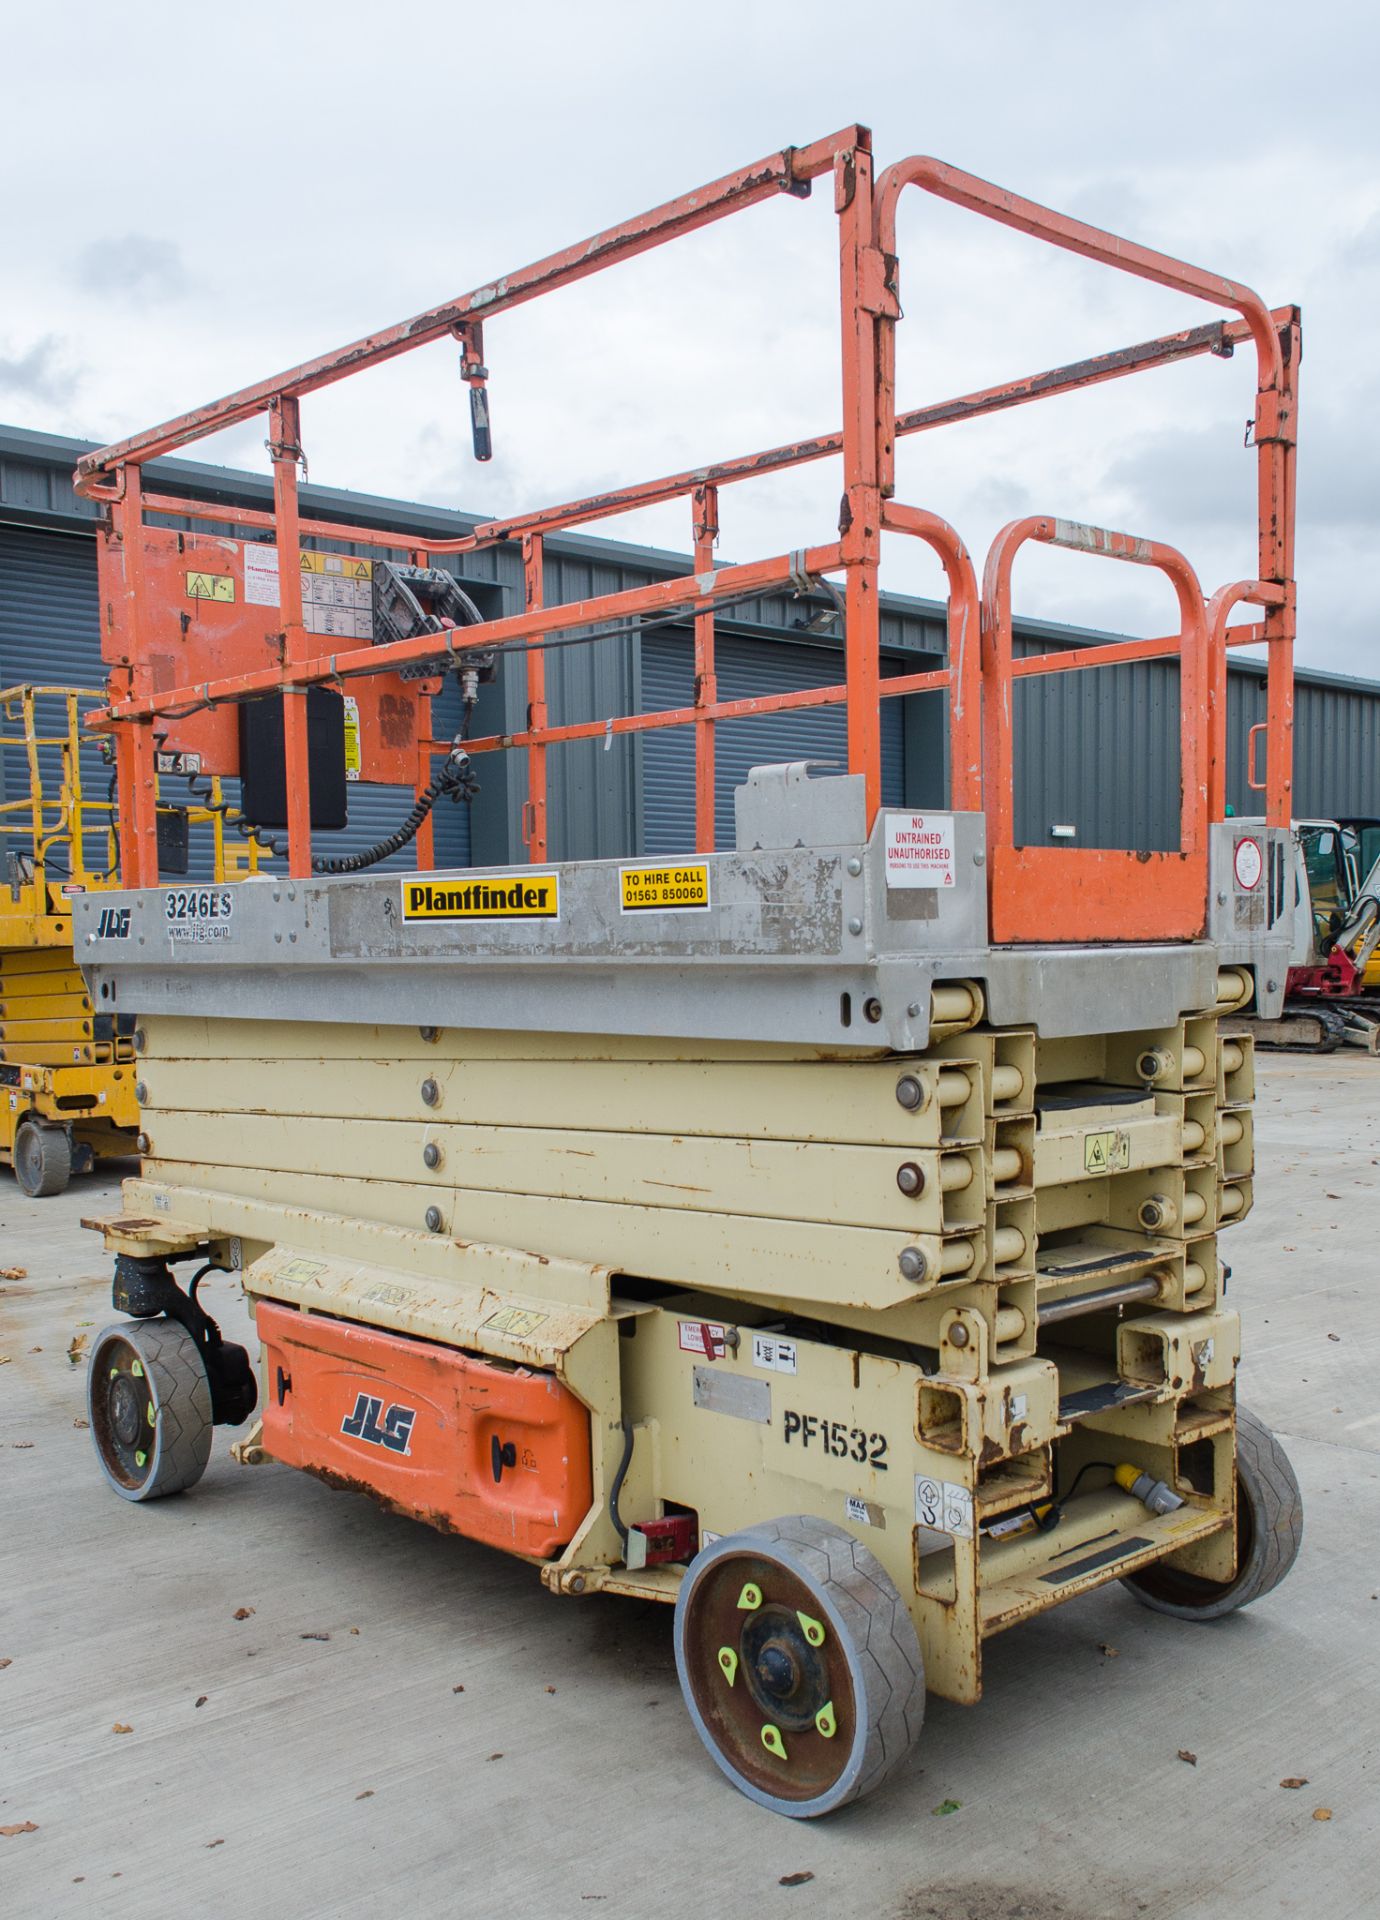 JLG 3246 ES battery electric scissor lift Year:- 2011 S/N: 2037 Recorded hours:- 416 PF1532 - Image 2 of 12